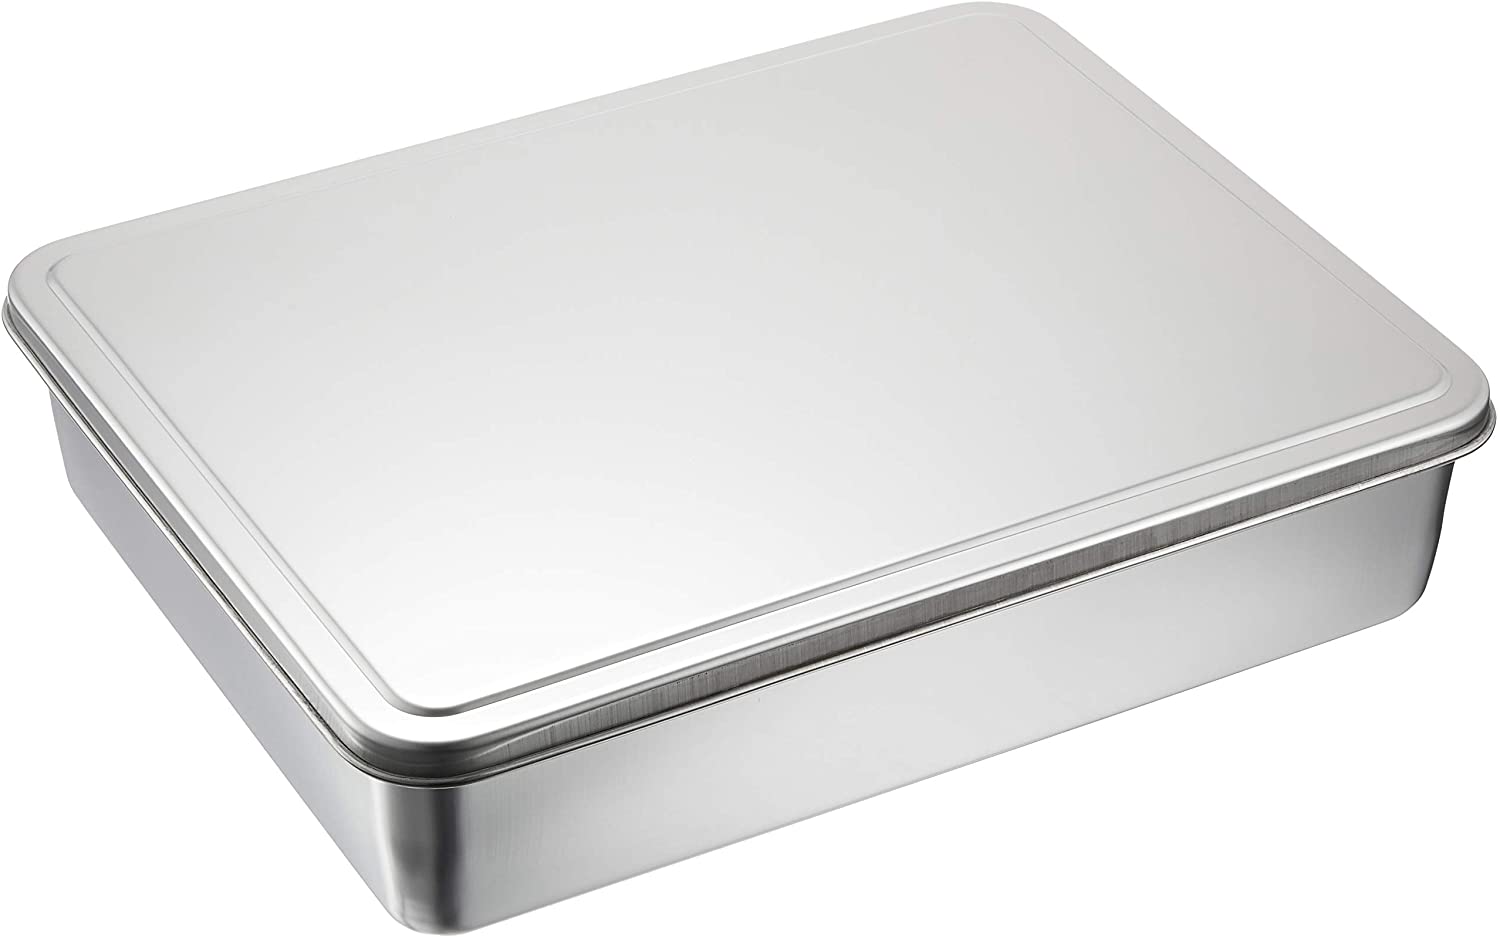 Stainless Steel Yakumi Pan Container with 6 Compartments